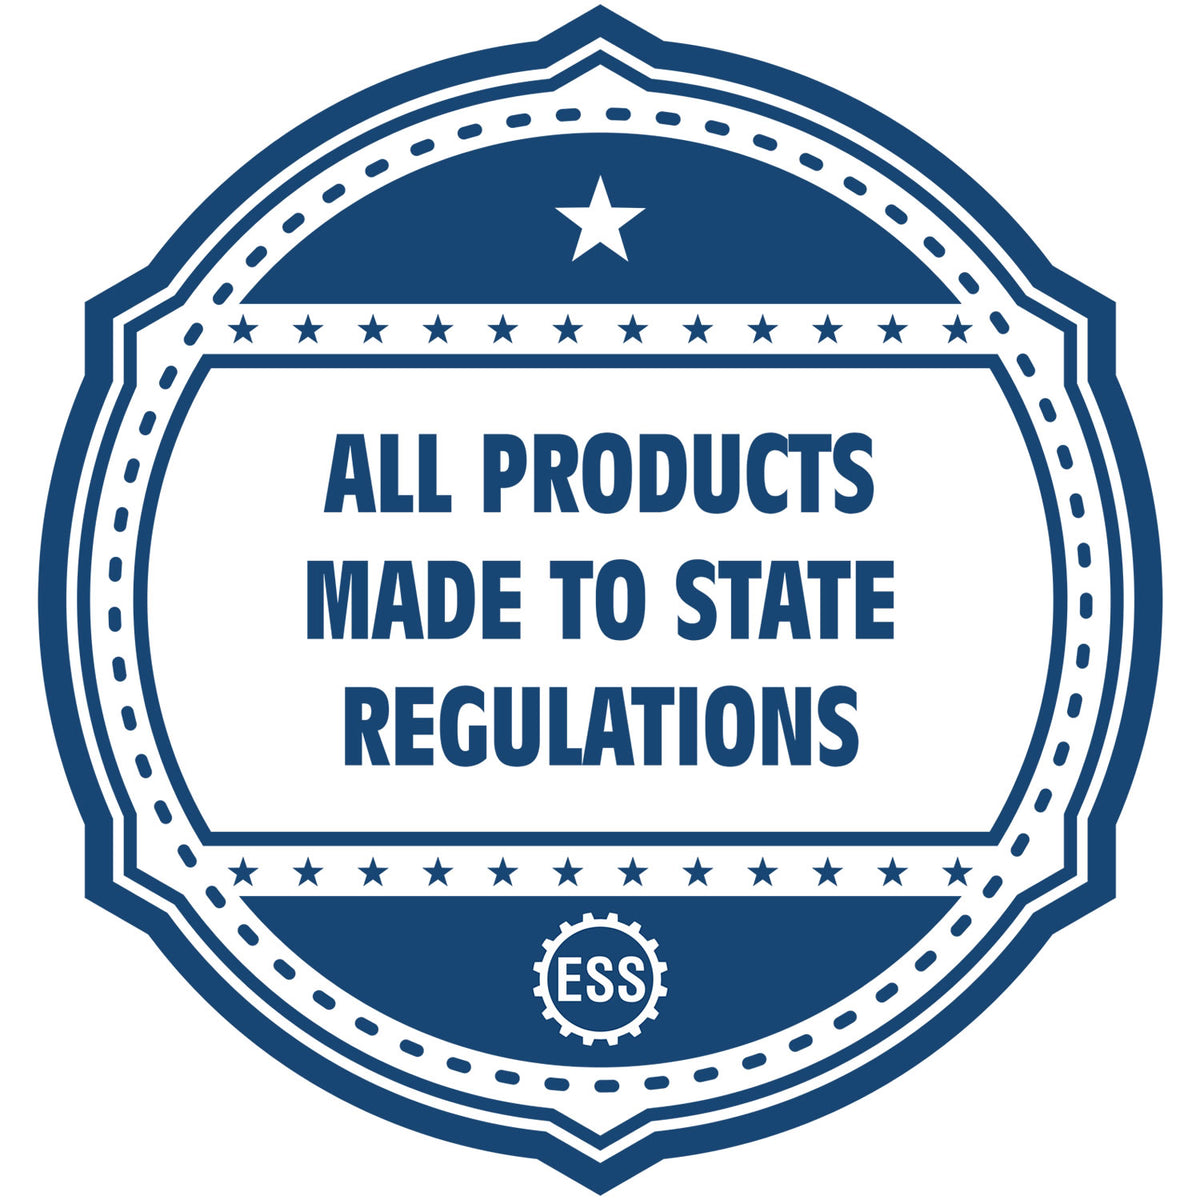 An icon or badge element for the Idaho Engineer Desk Seal showing that this product is made in compliance with state regulations.